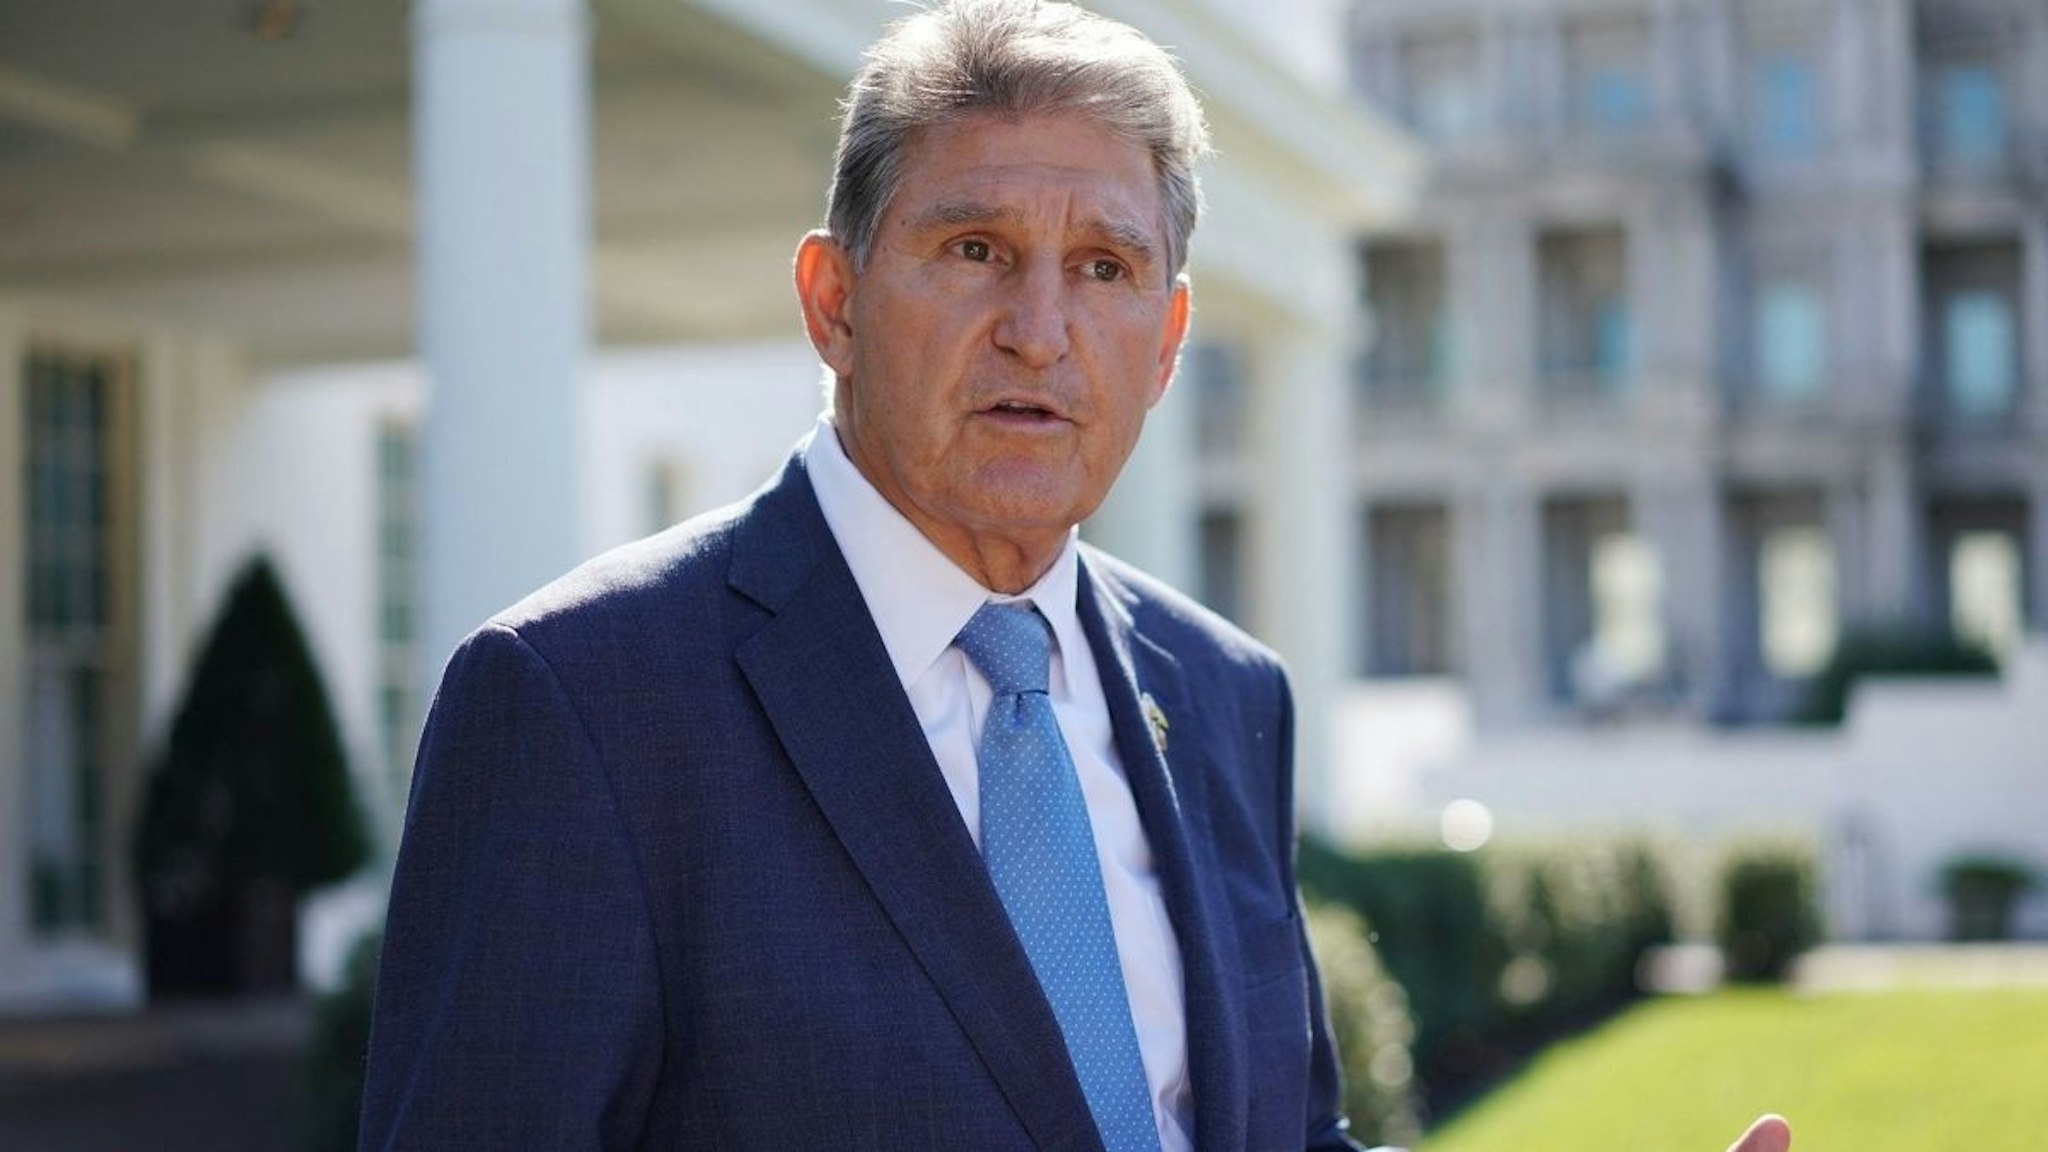 Senator Joe Manchin, D-WV, speaks to reporters outside of the West Wing after attending the signing ceremony for H.R. 5376, the Inflation Reduction Act of 2022, at the White House in Washington, DC on August 16, 2022.